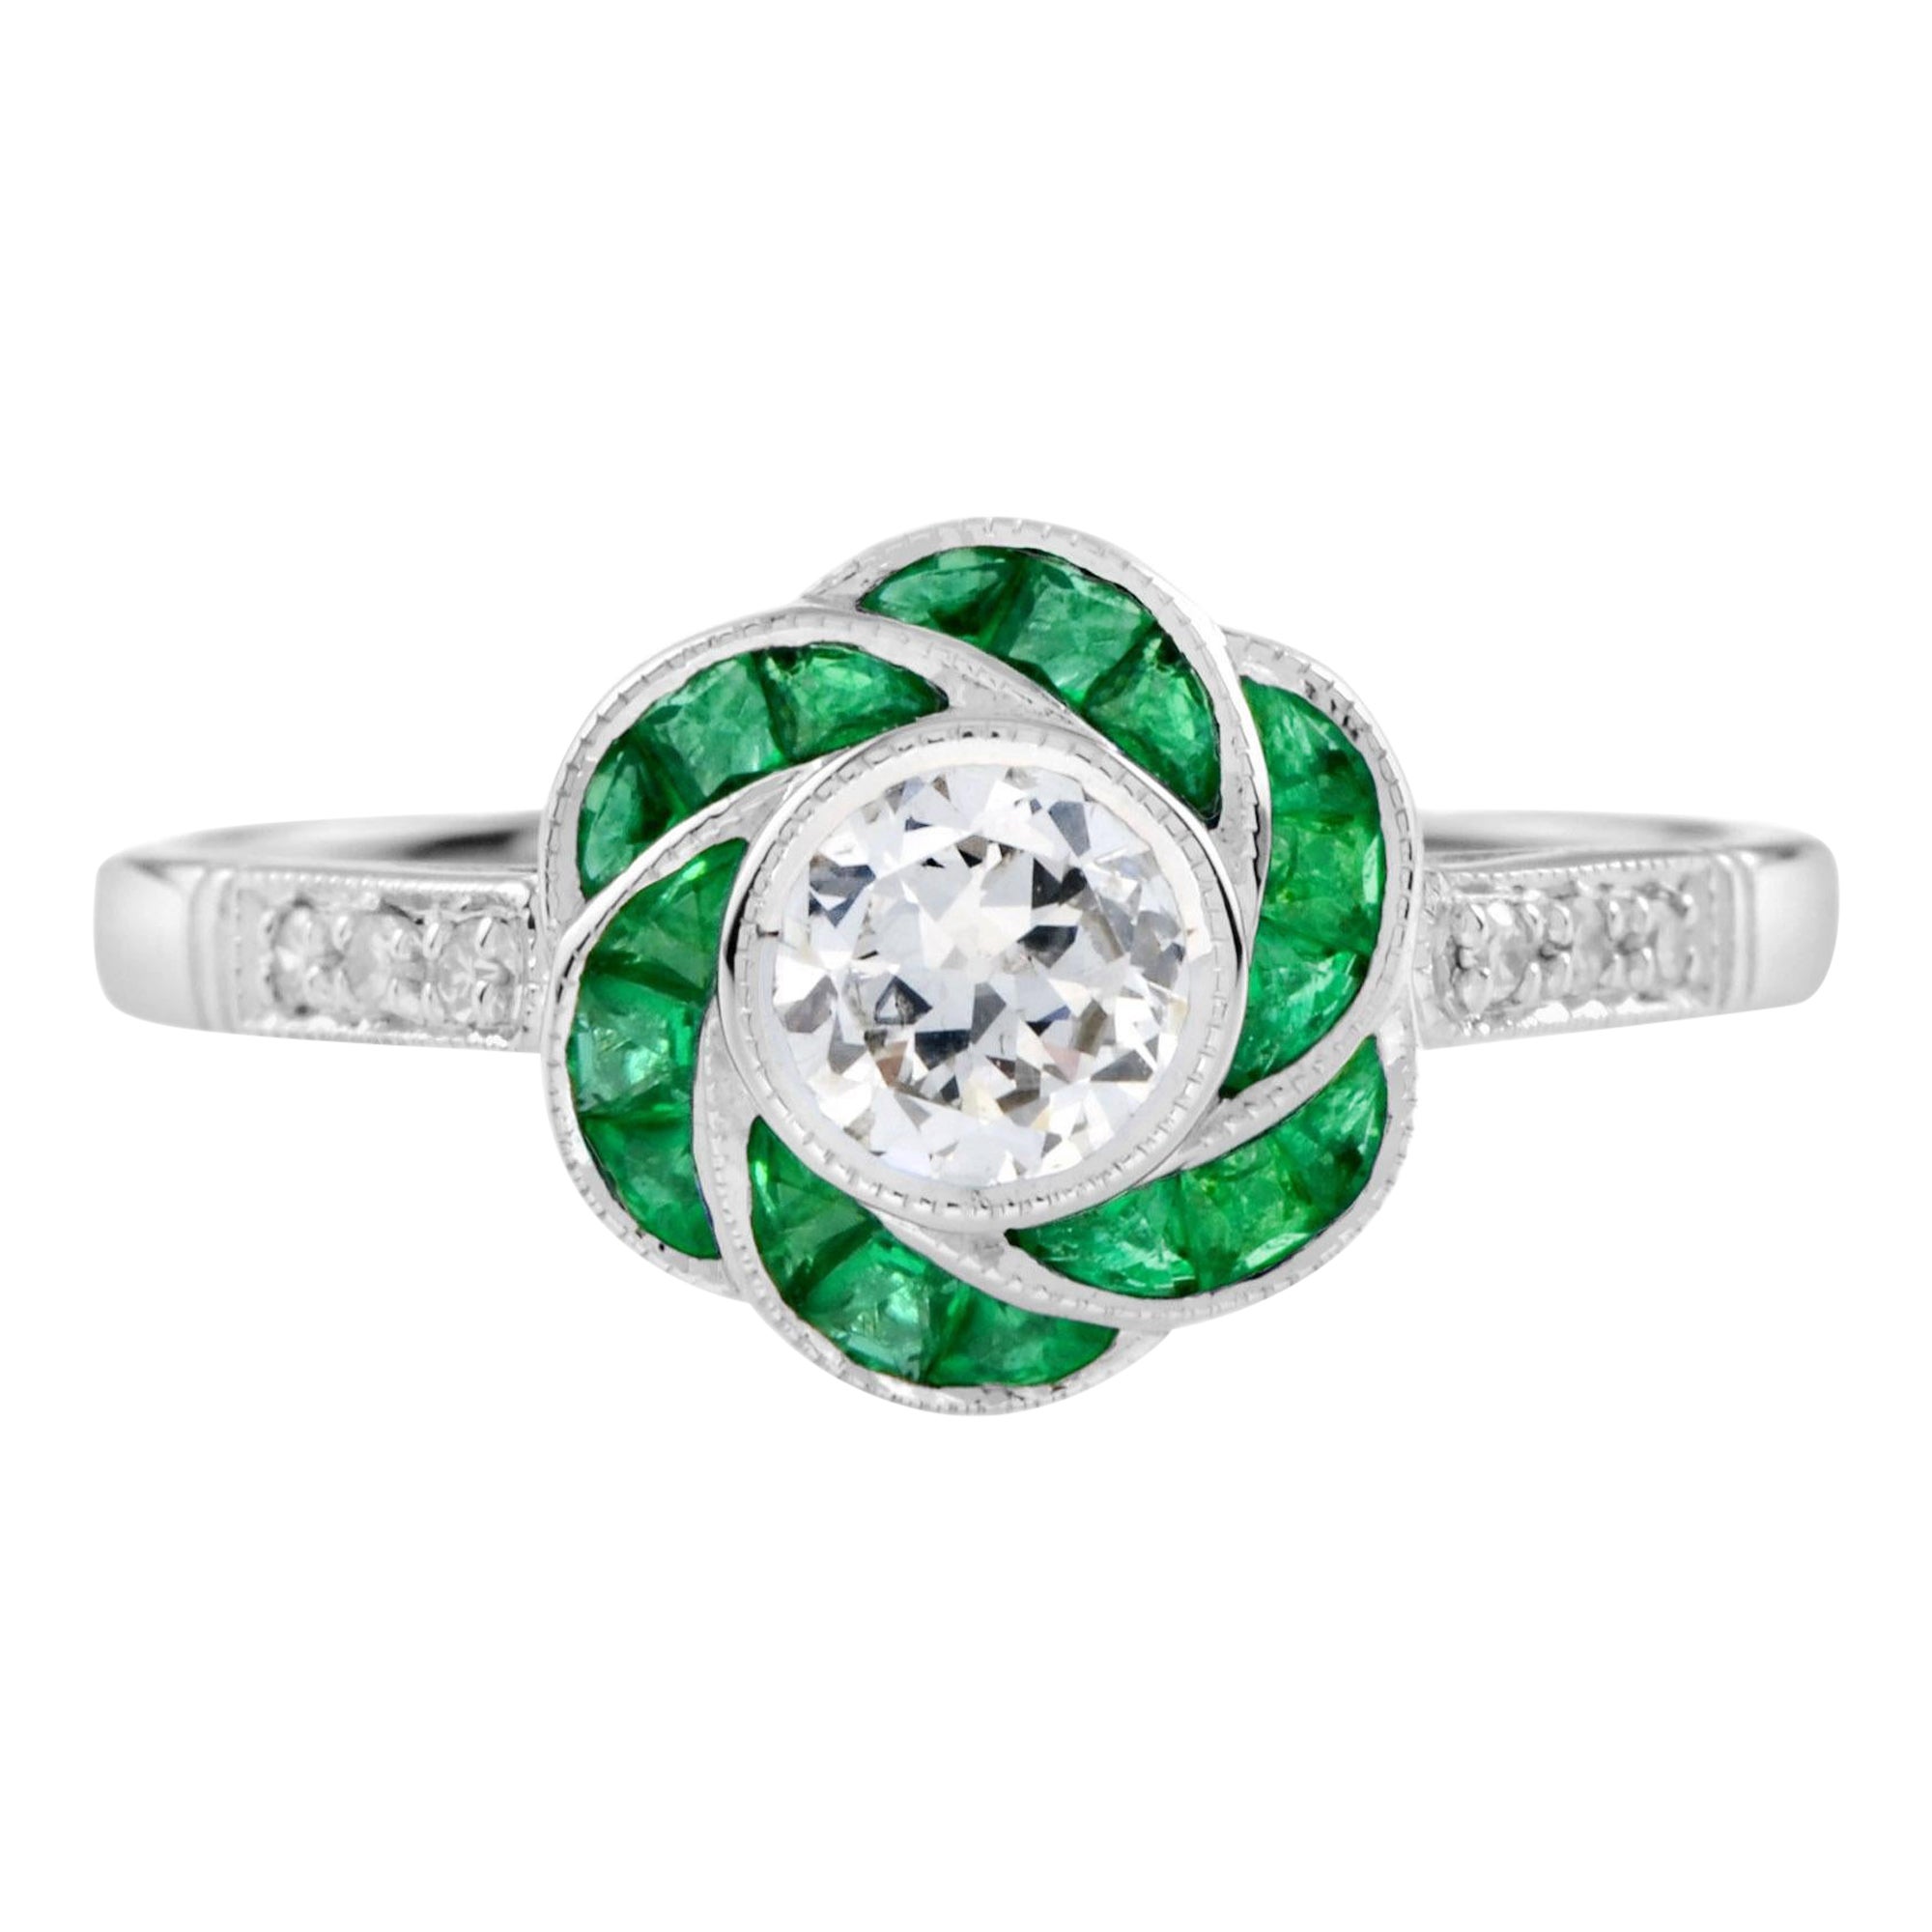 For Sale:  Diamond and Emerald Art Deco Style Rose Flower Ring in 18K White Gold